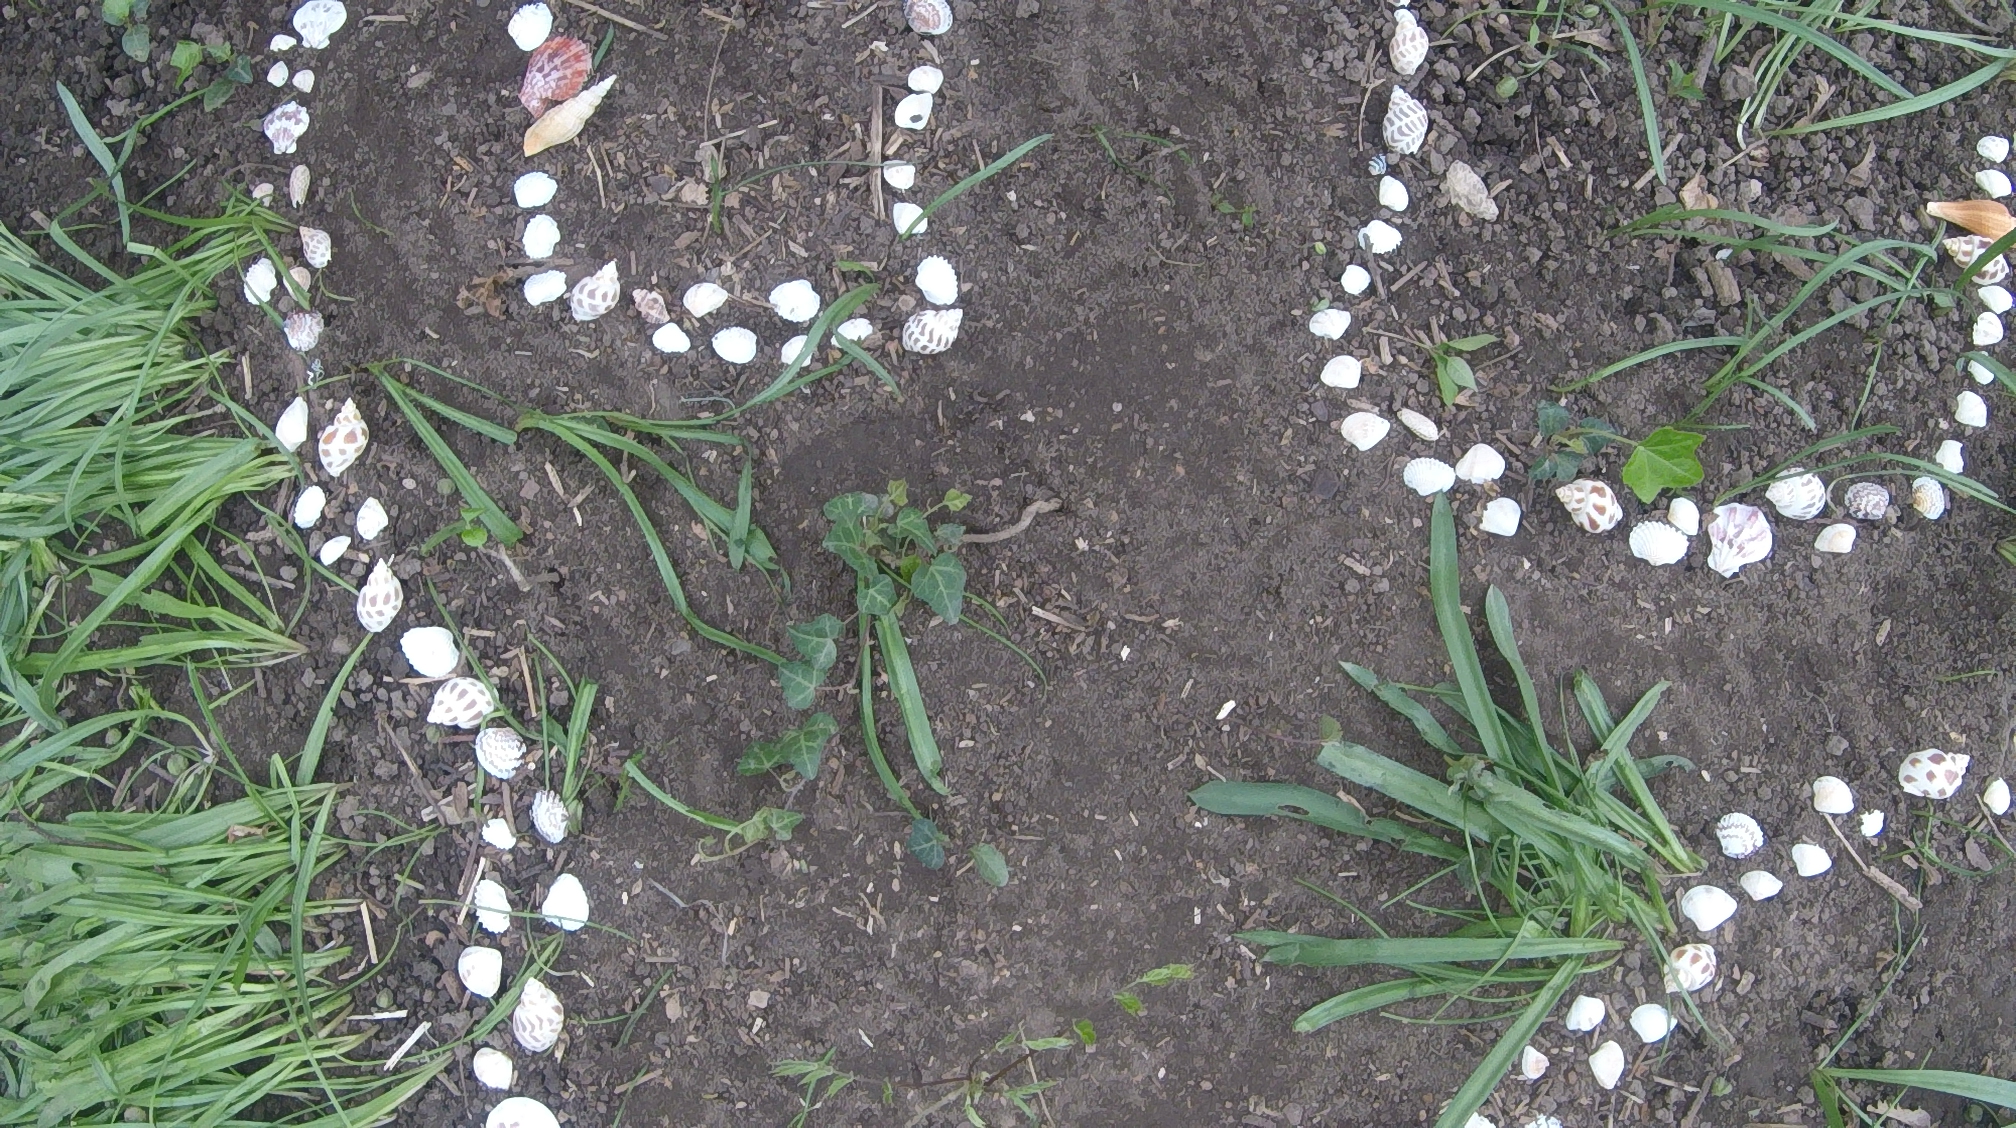 A silhouette of the artist traced in double lines of white sea shells lay over Soil and blades of grass.